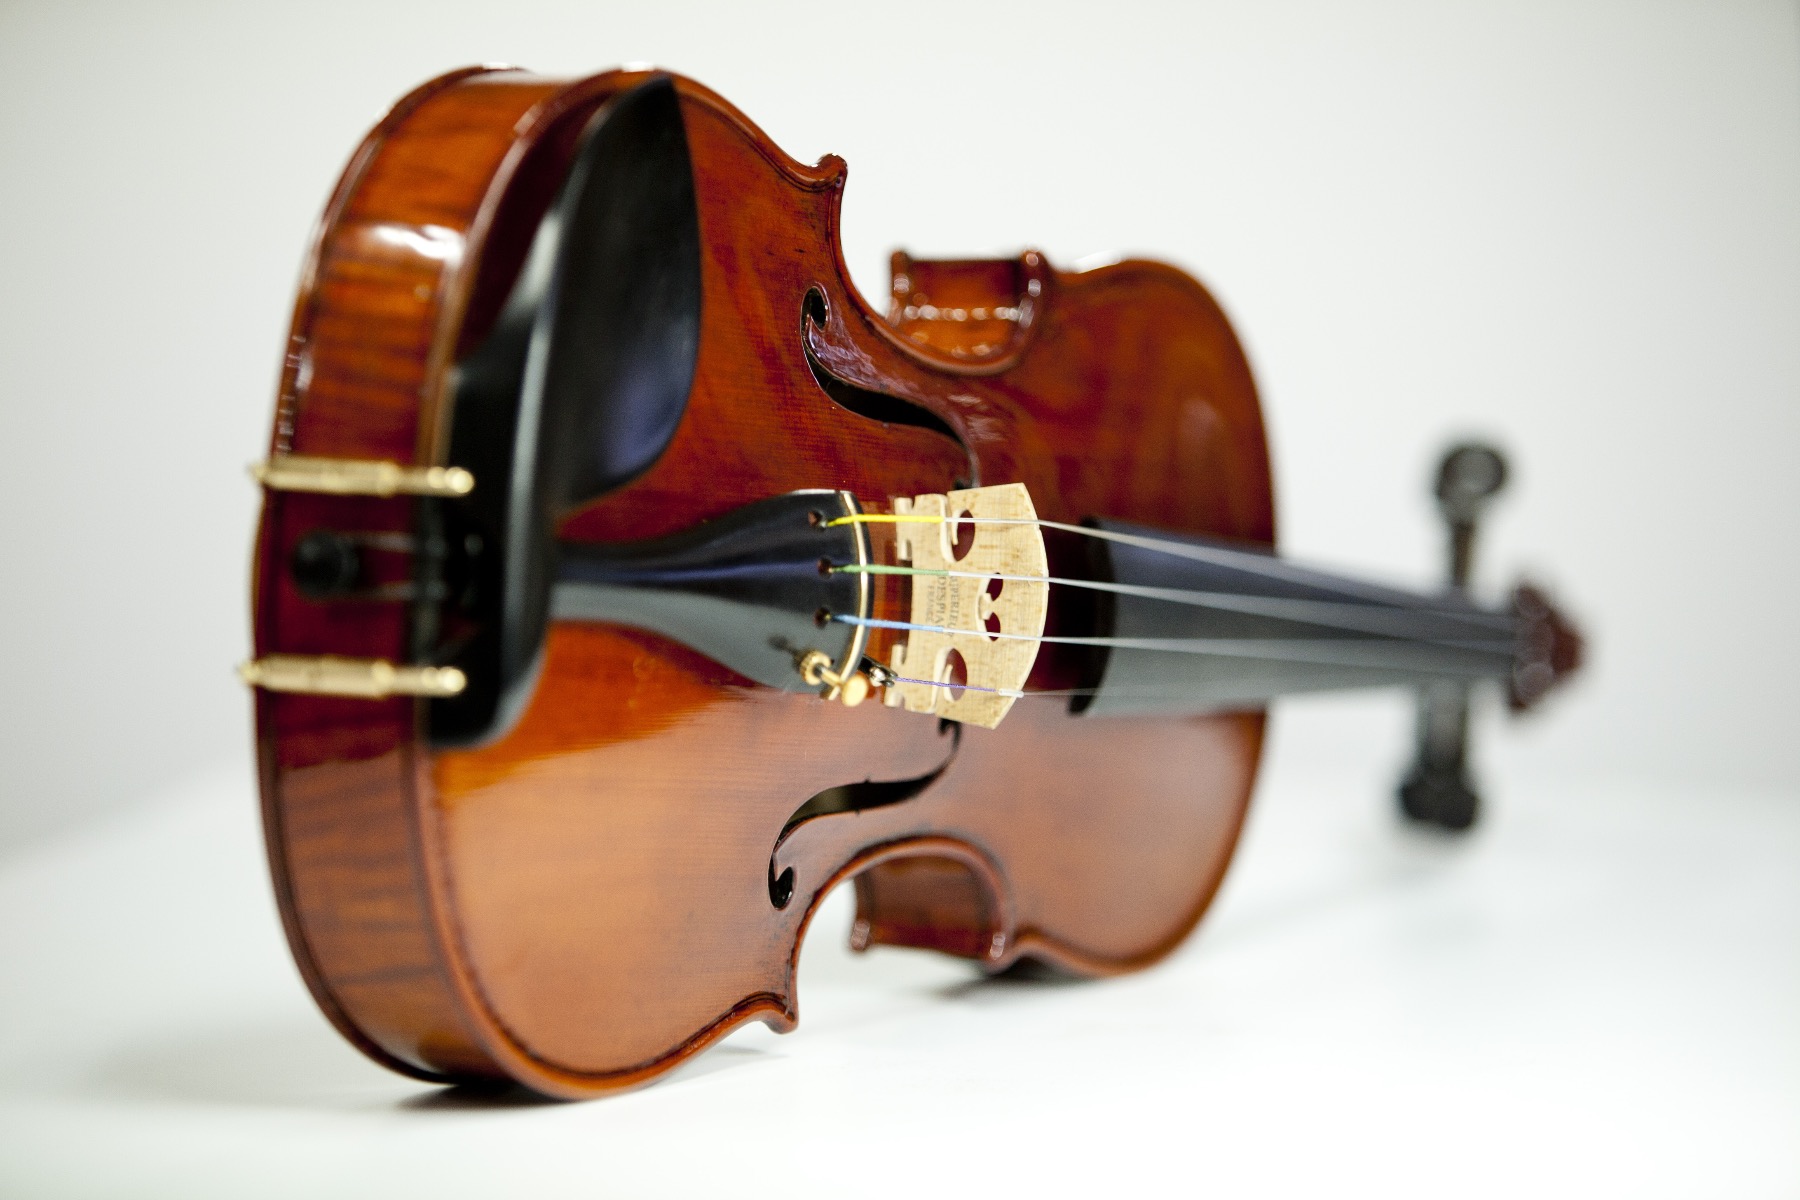 Violin with Guarneri style chin rest